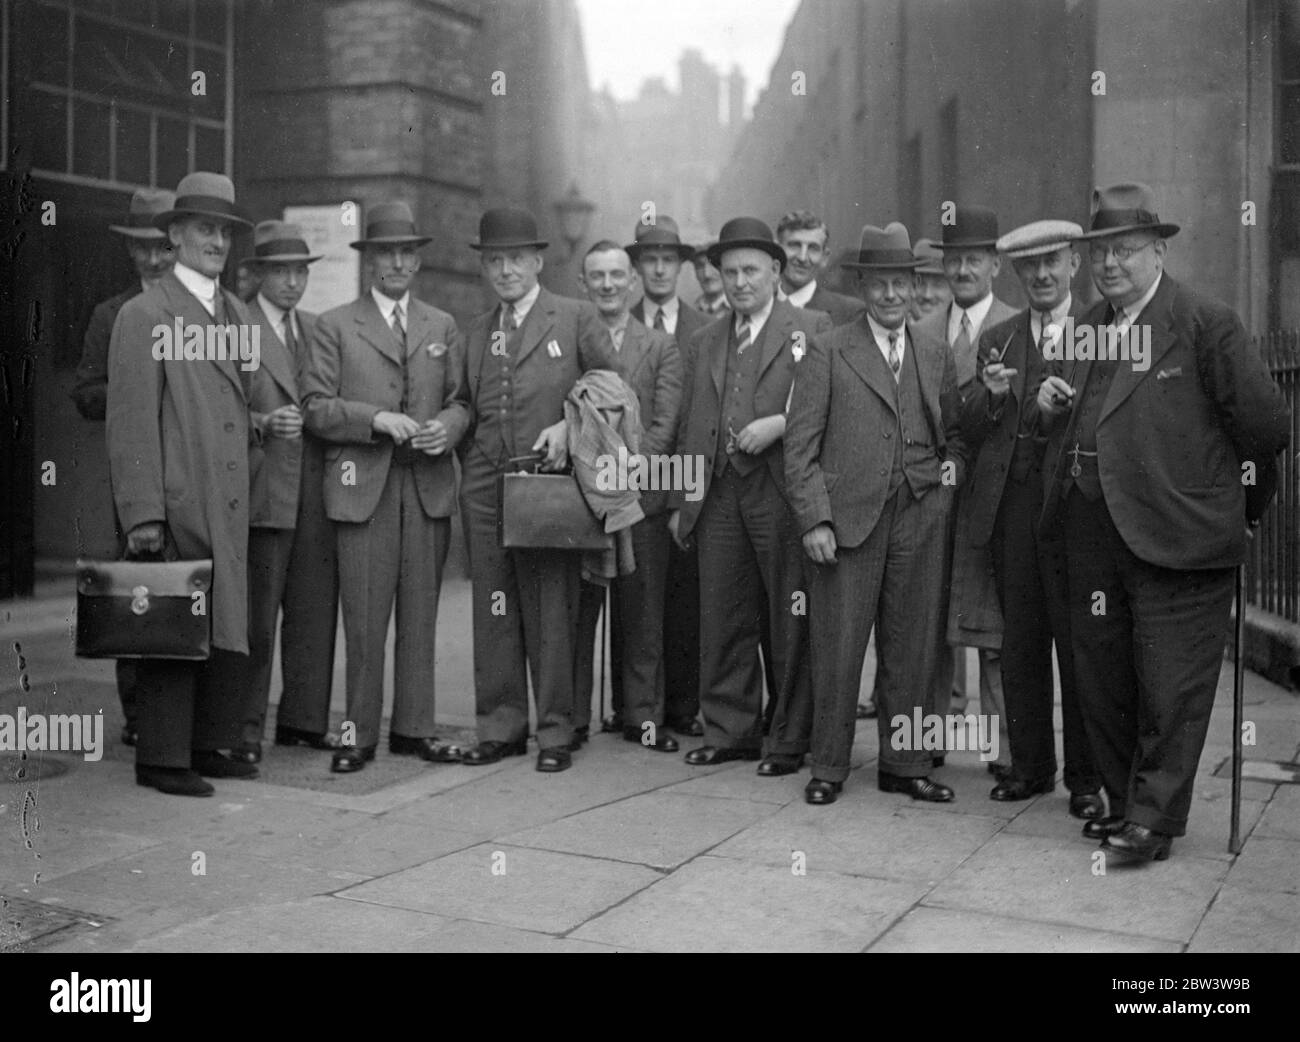 National union of railwaymen to decide companies offer at London conference . To vote on the acceptance or refusal of the companies offer in connection with rates of pay , delegates of the National Union of railwaymen are meeting at the Conway hall , Red Lion Square , WC . Mr Rice will move rejection of the companies terms on the grounds that they are insufficient . Photo shows , delegates to the National Union of railwayman ' s conference at the Conway Hall . Second from left is Mr Rice who will move rejection of the companies offer . 12 May 1936 Stock Photo